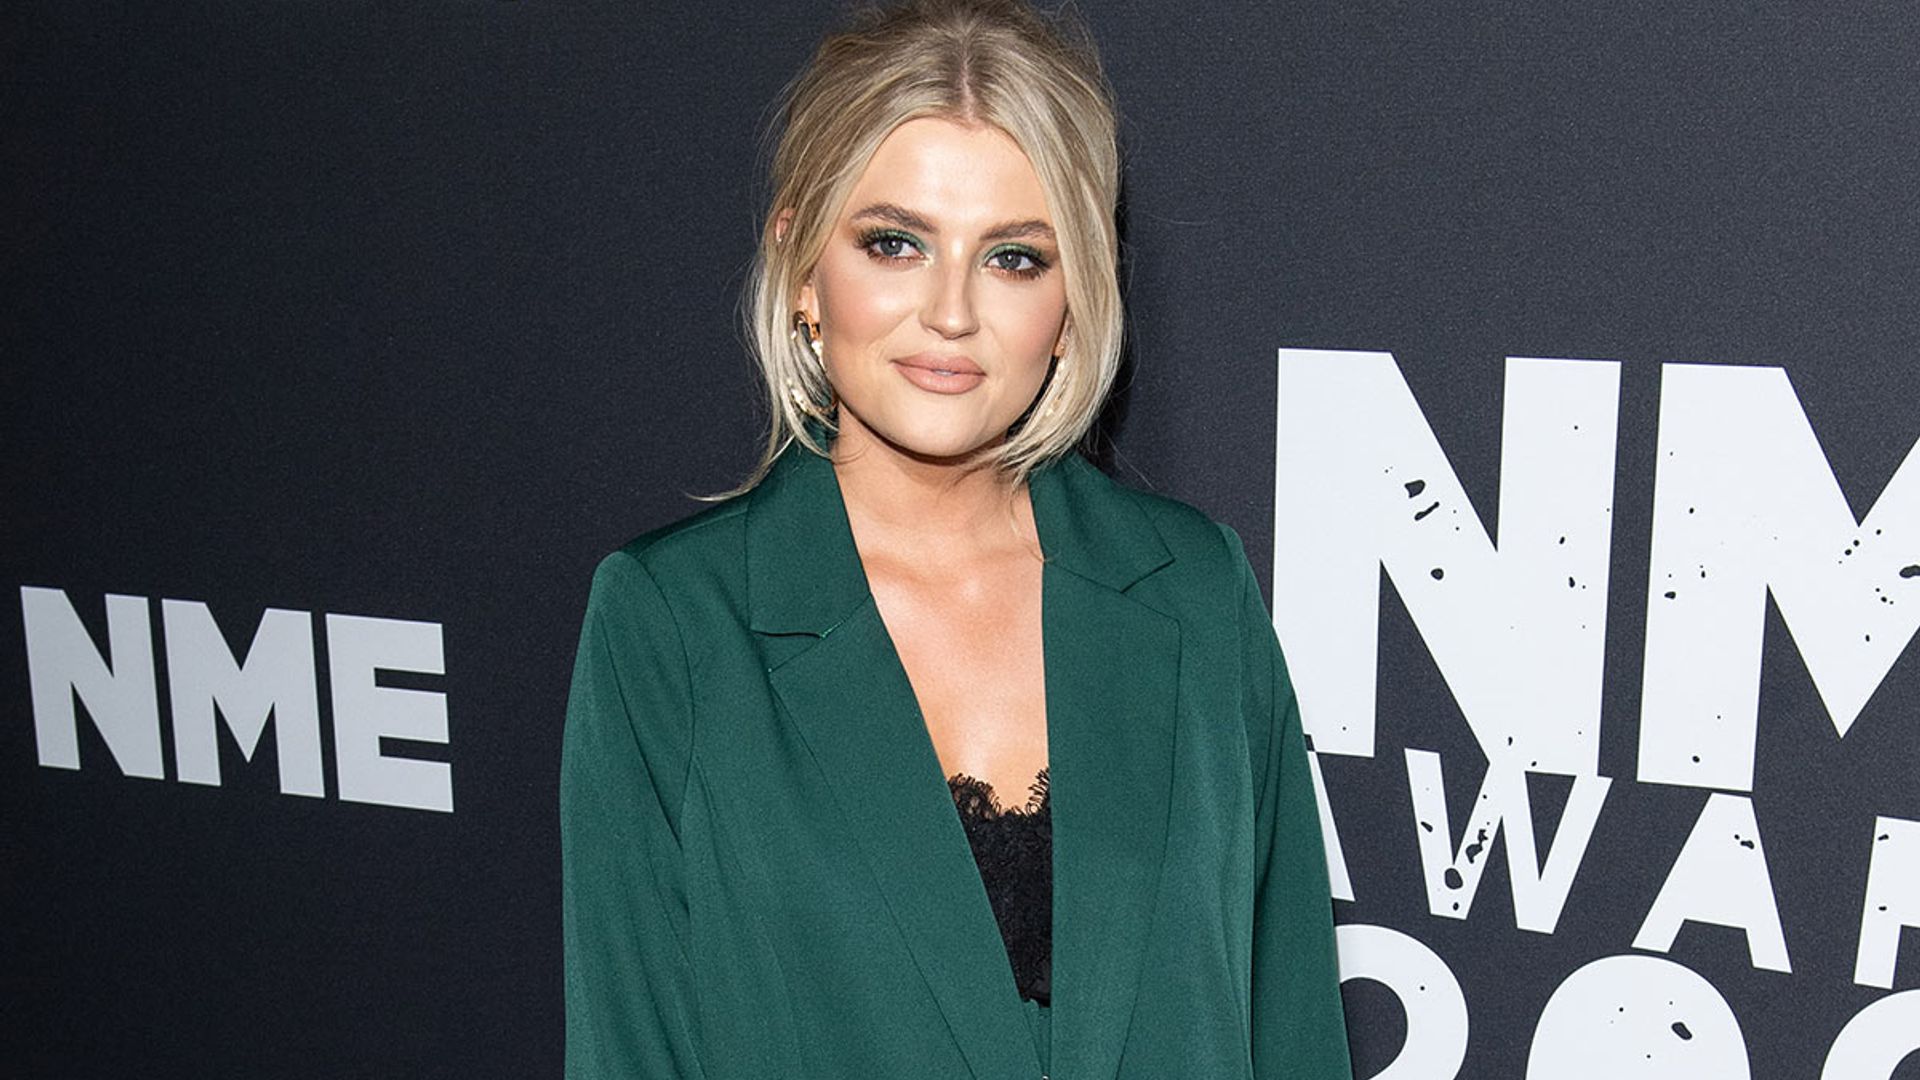 We’re still not over Coronation Street’s Lucy Fallon’s £37 Missguided suit